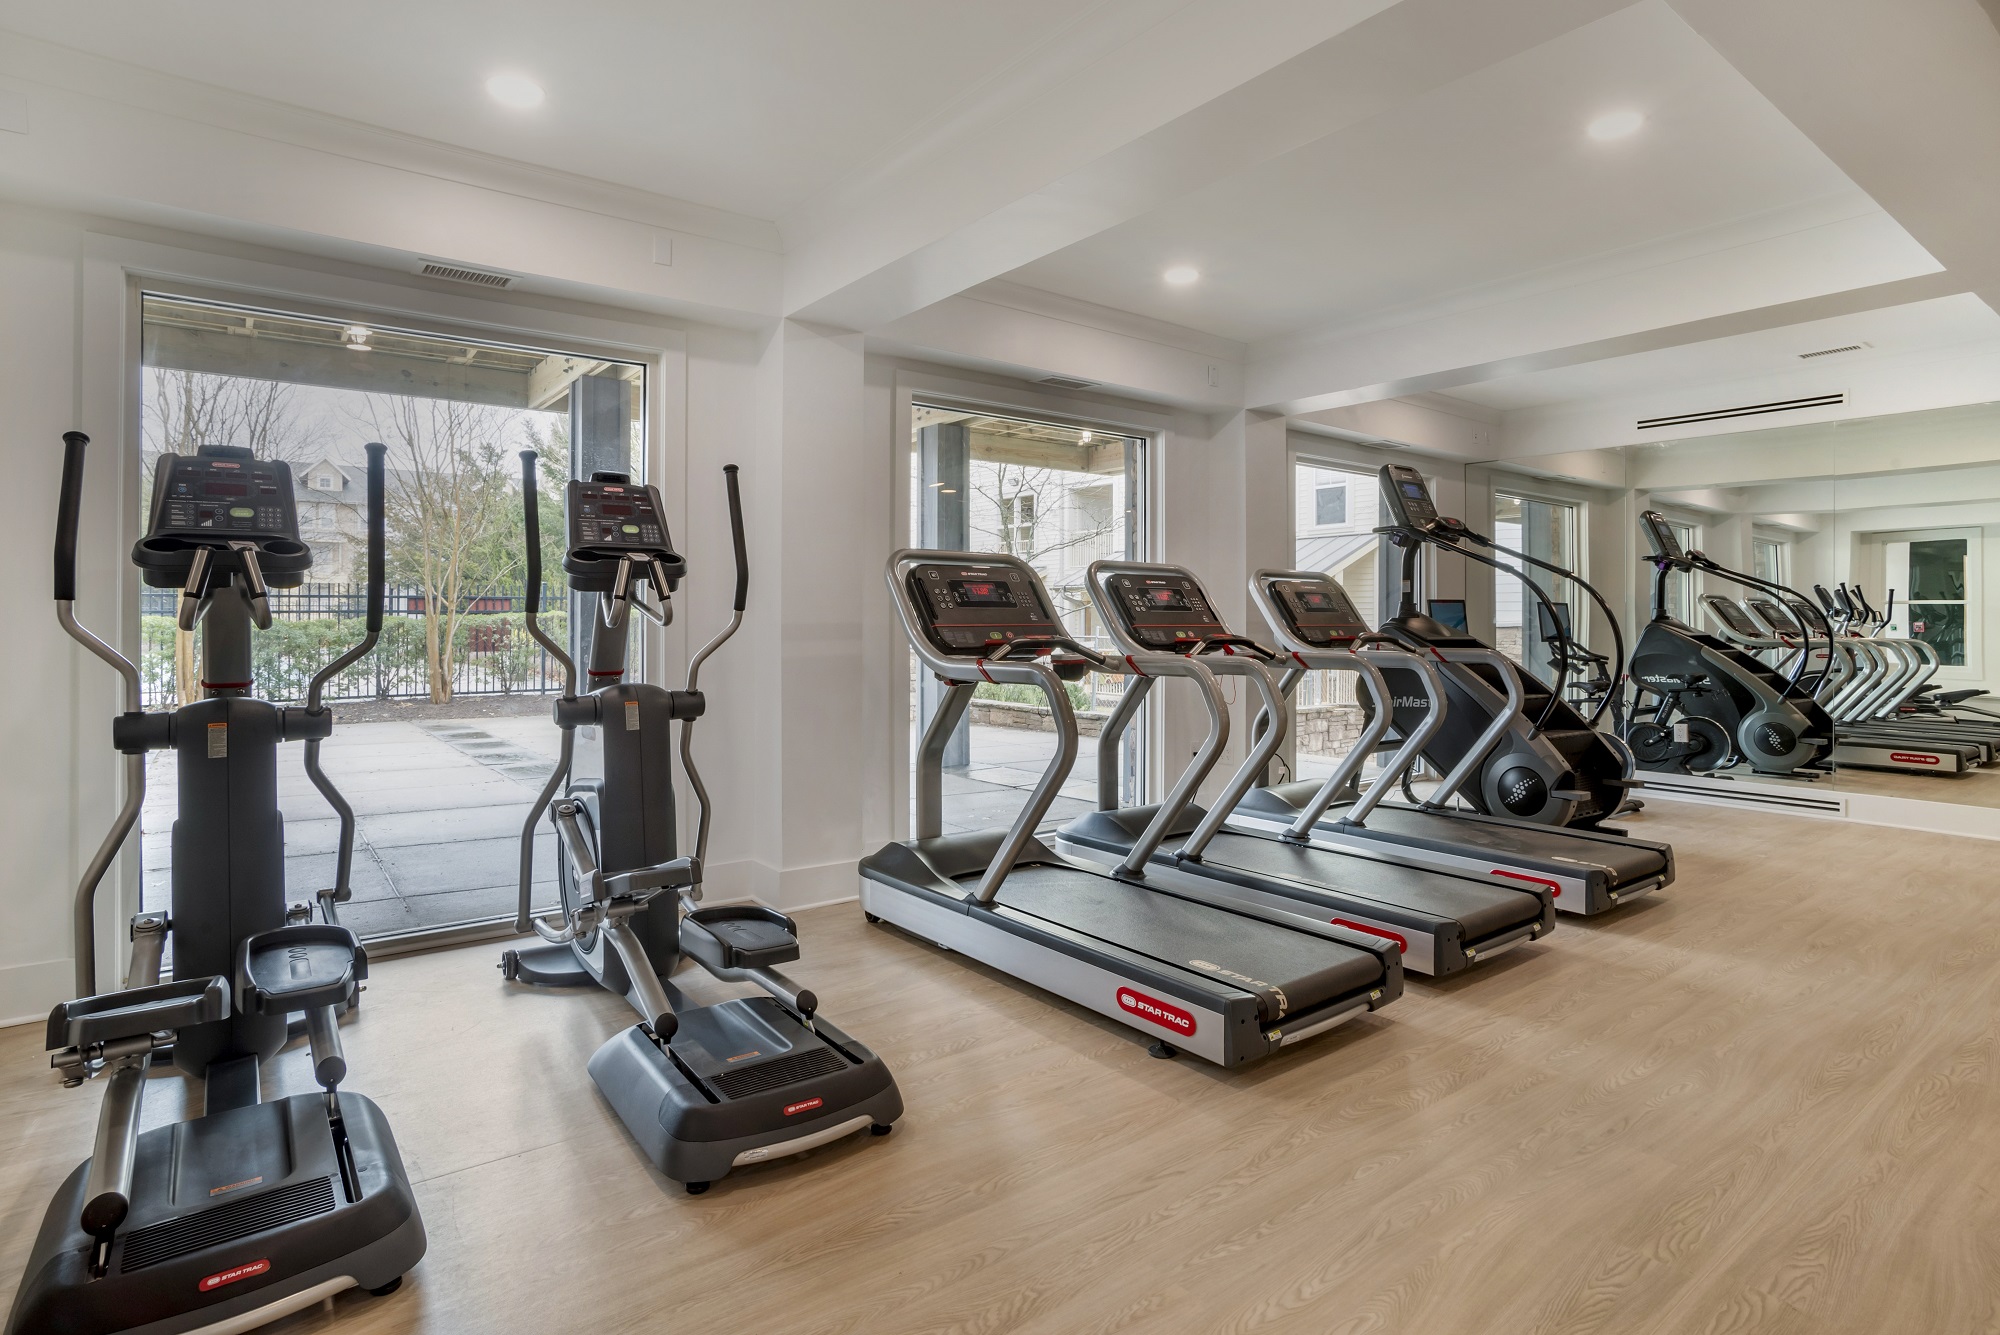 Indoor gym area with cardio machines, outdoor lighting, and wood-style flooring